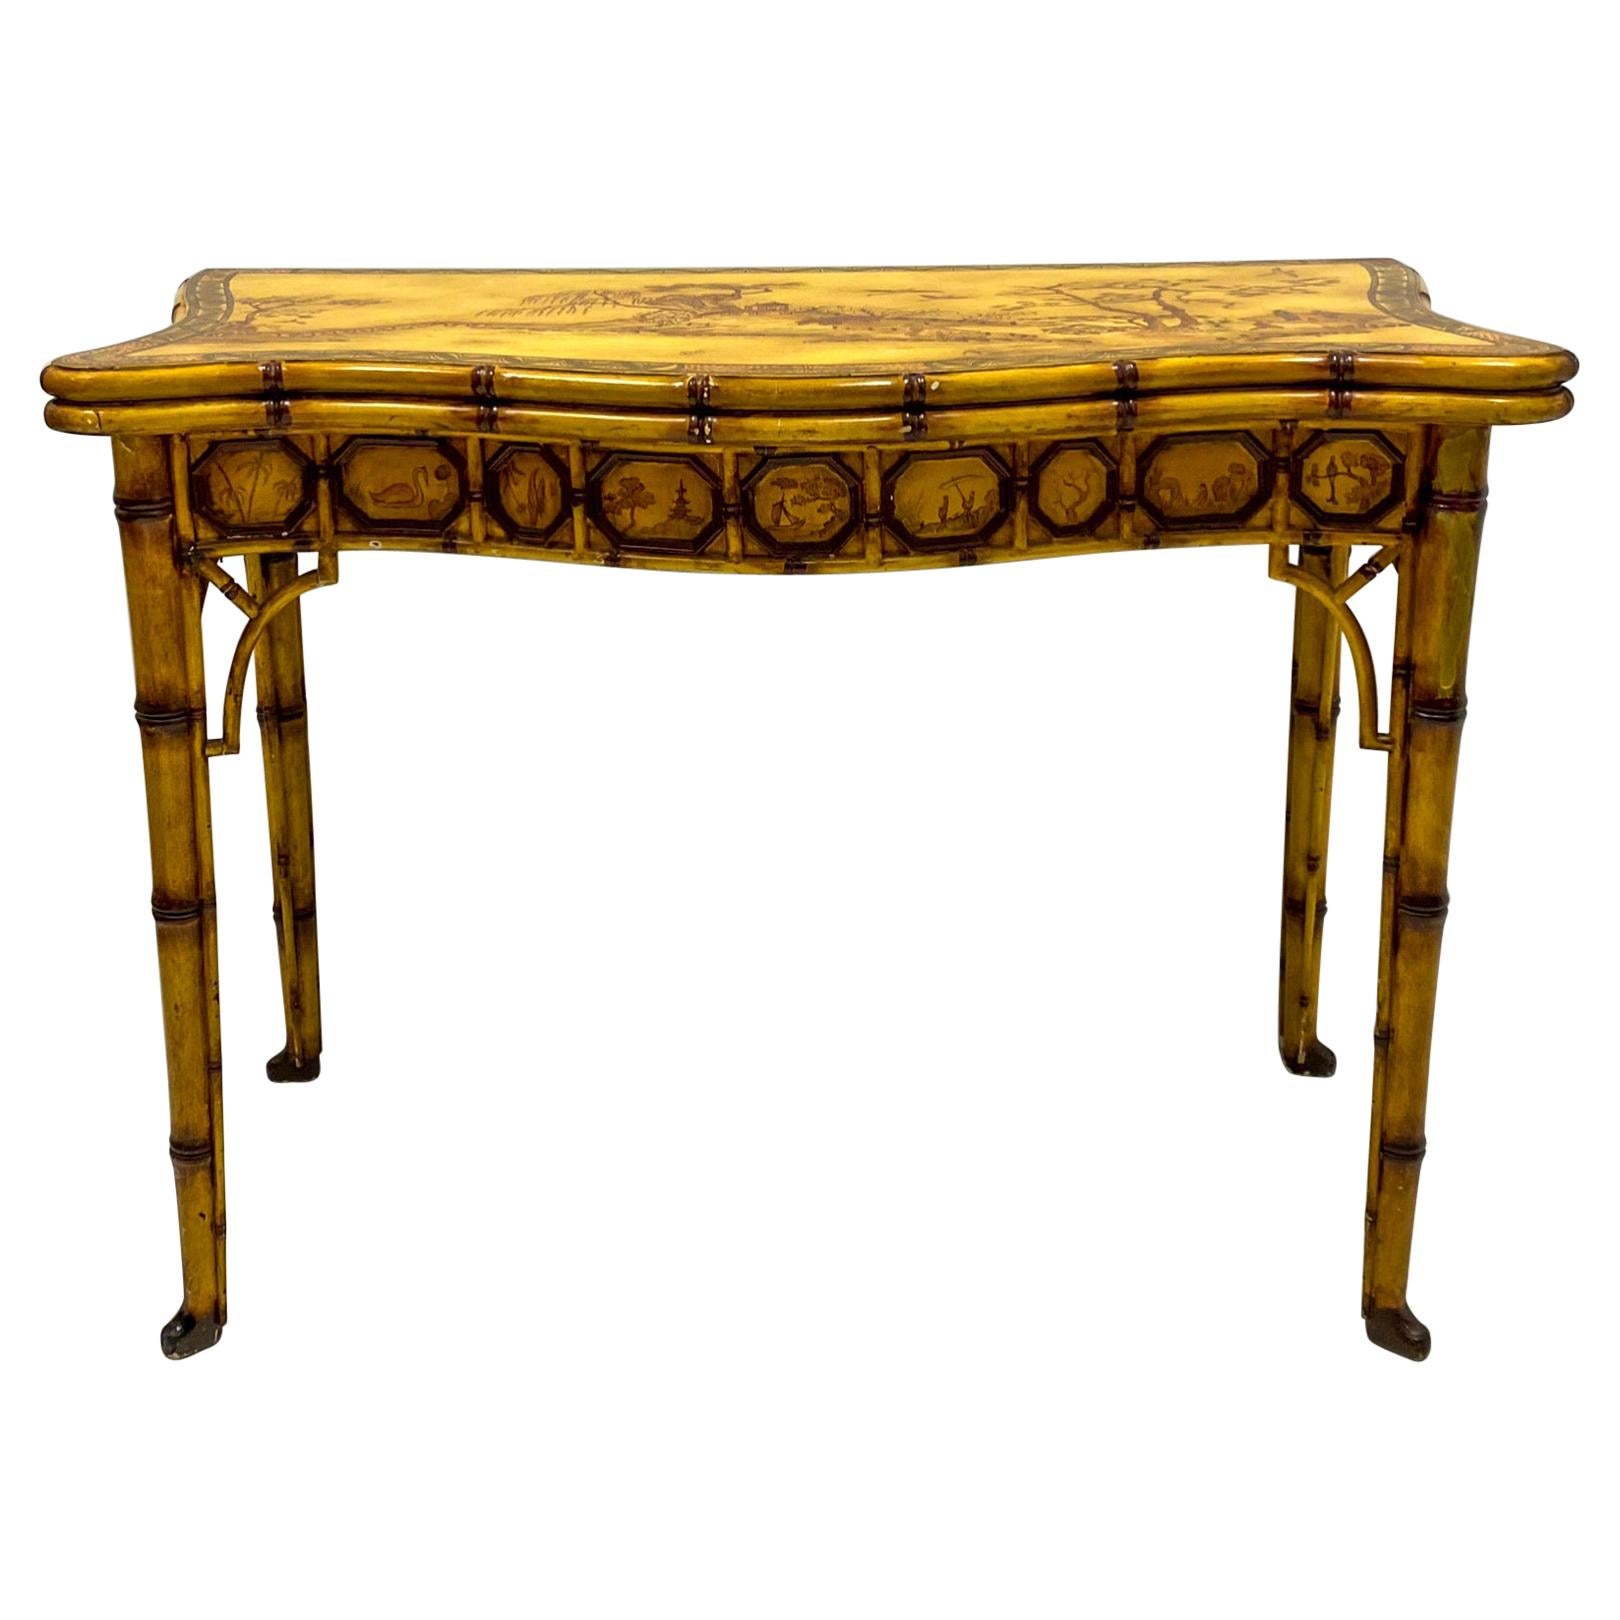 Trouvailles French Chinoiserie Faux Bamboo Game or Console Table